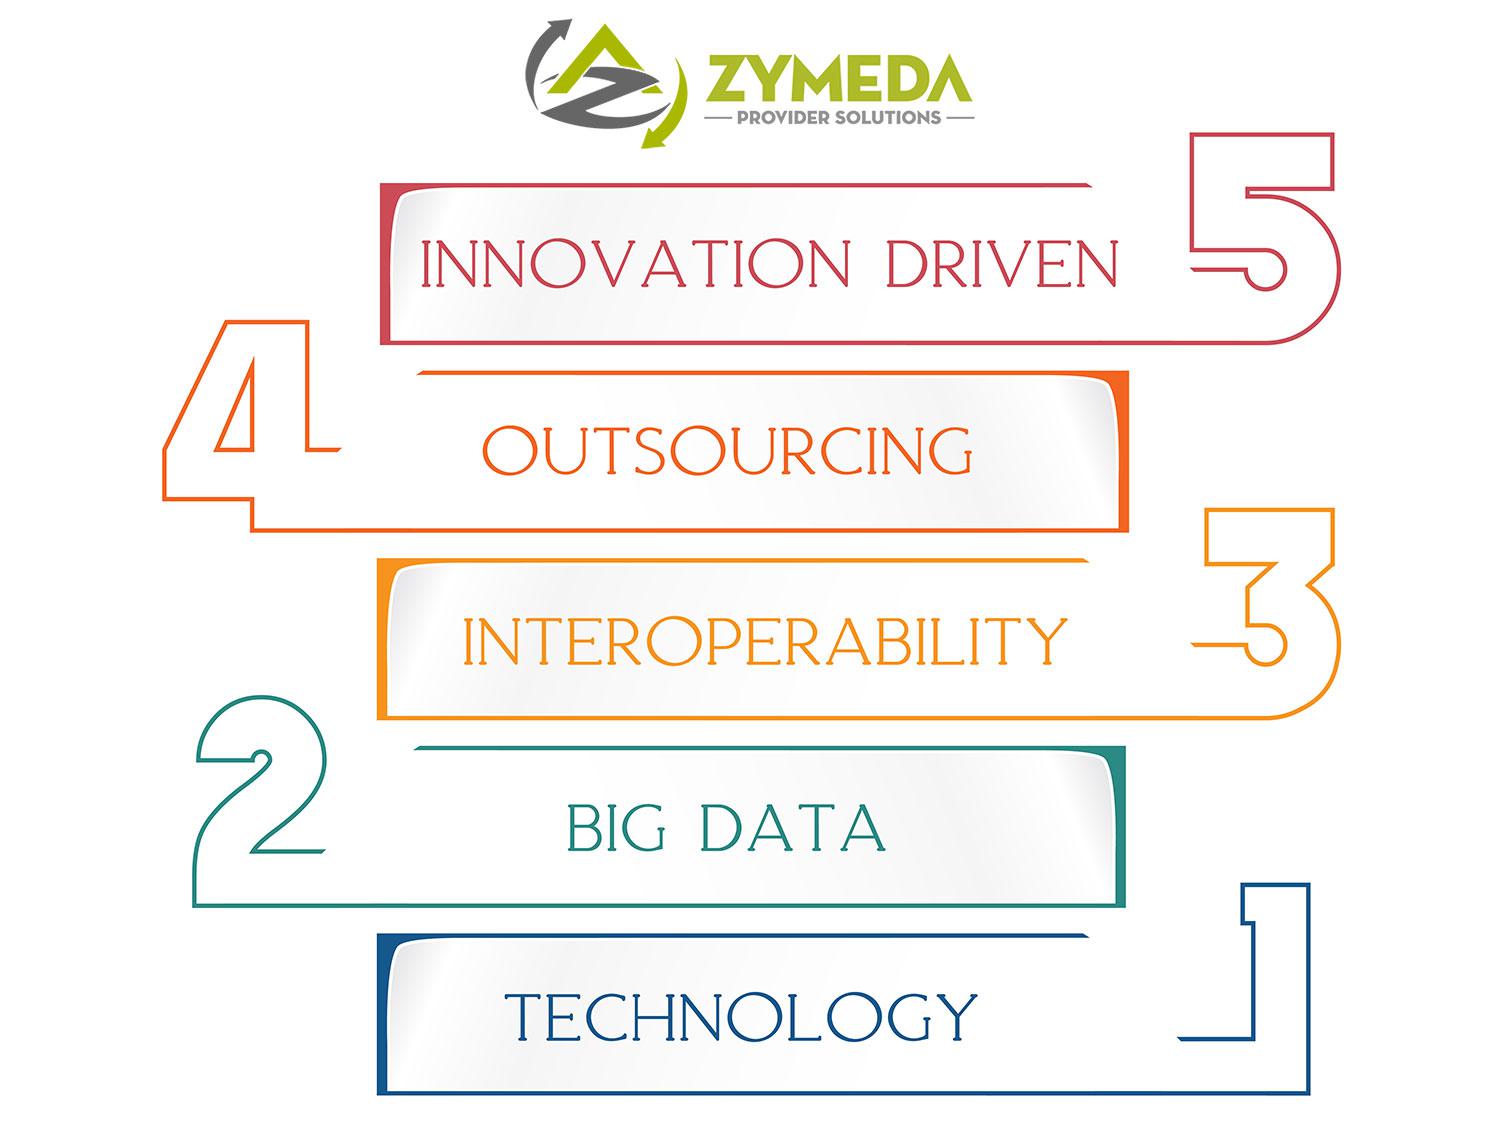 Zymeda Provider Solutions proudly presents a vision towards today and into the future, spelling out the top 5 RCM trends